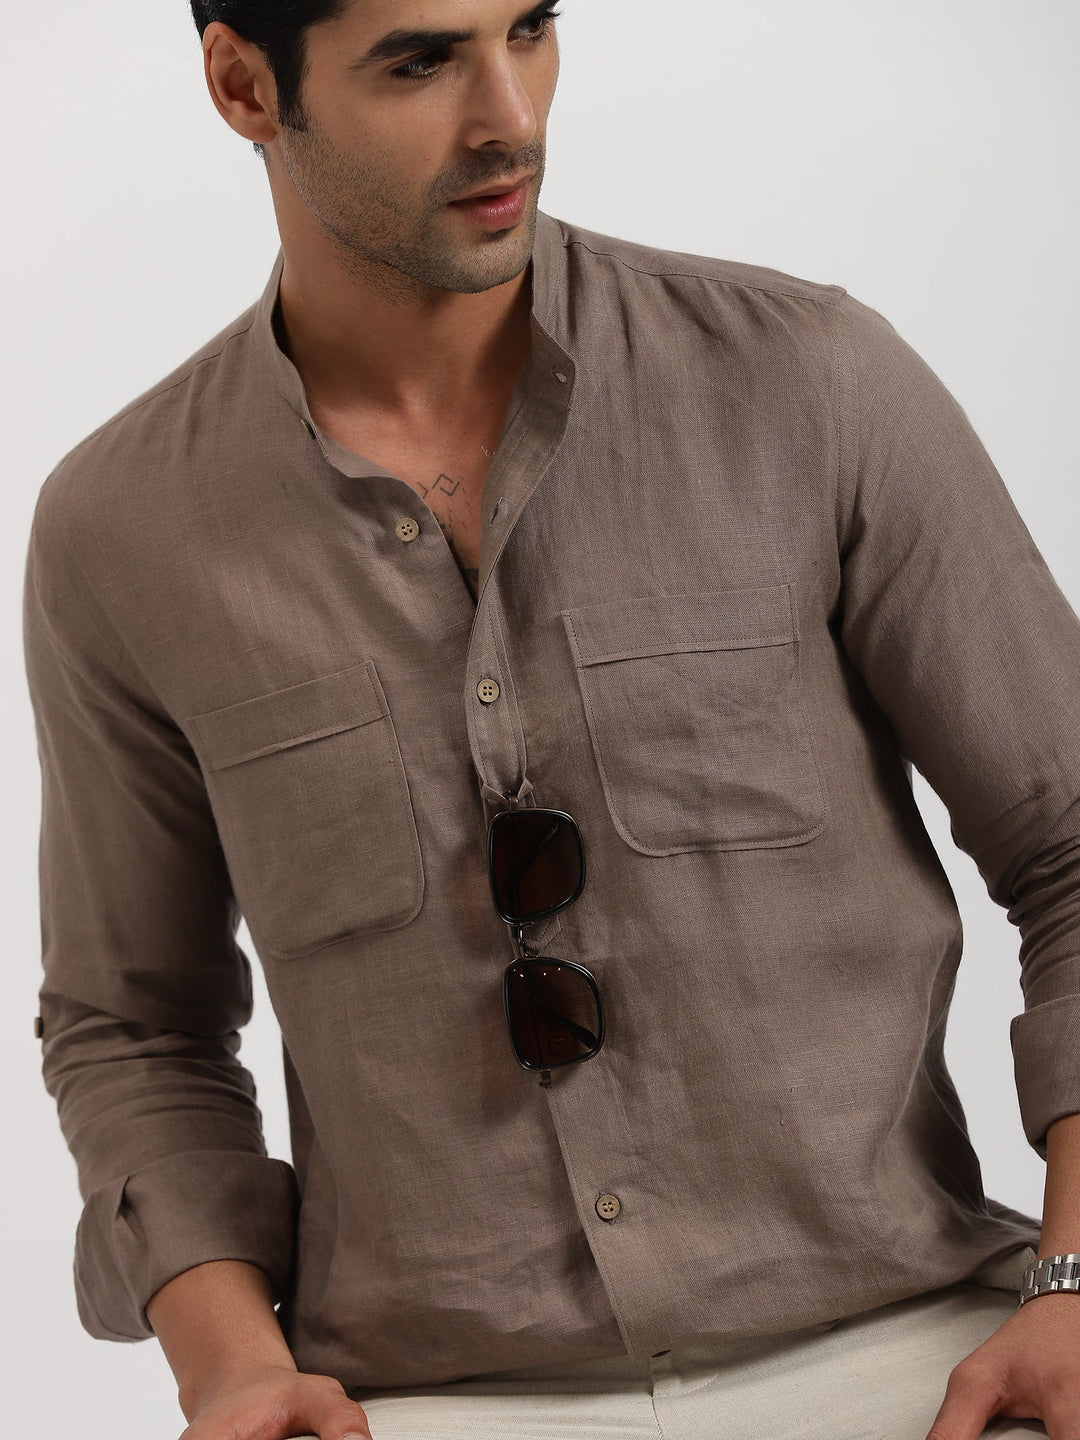 Luca - Pure Linen Double Pocket Full Sleeve Shirt - Sepia Brown | Rescue